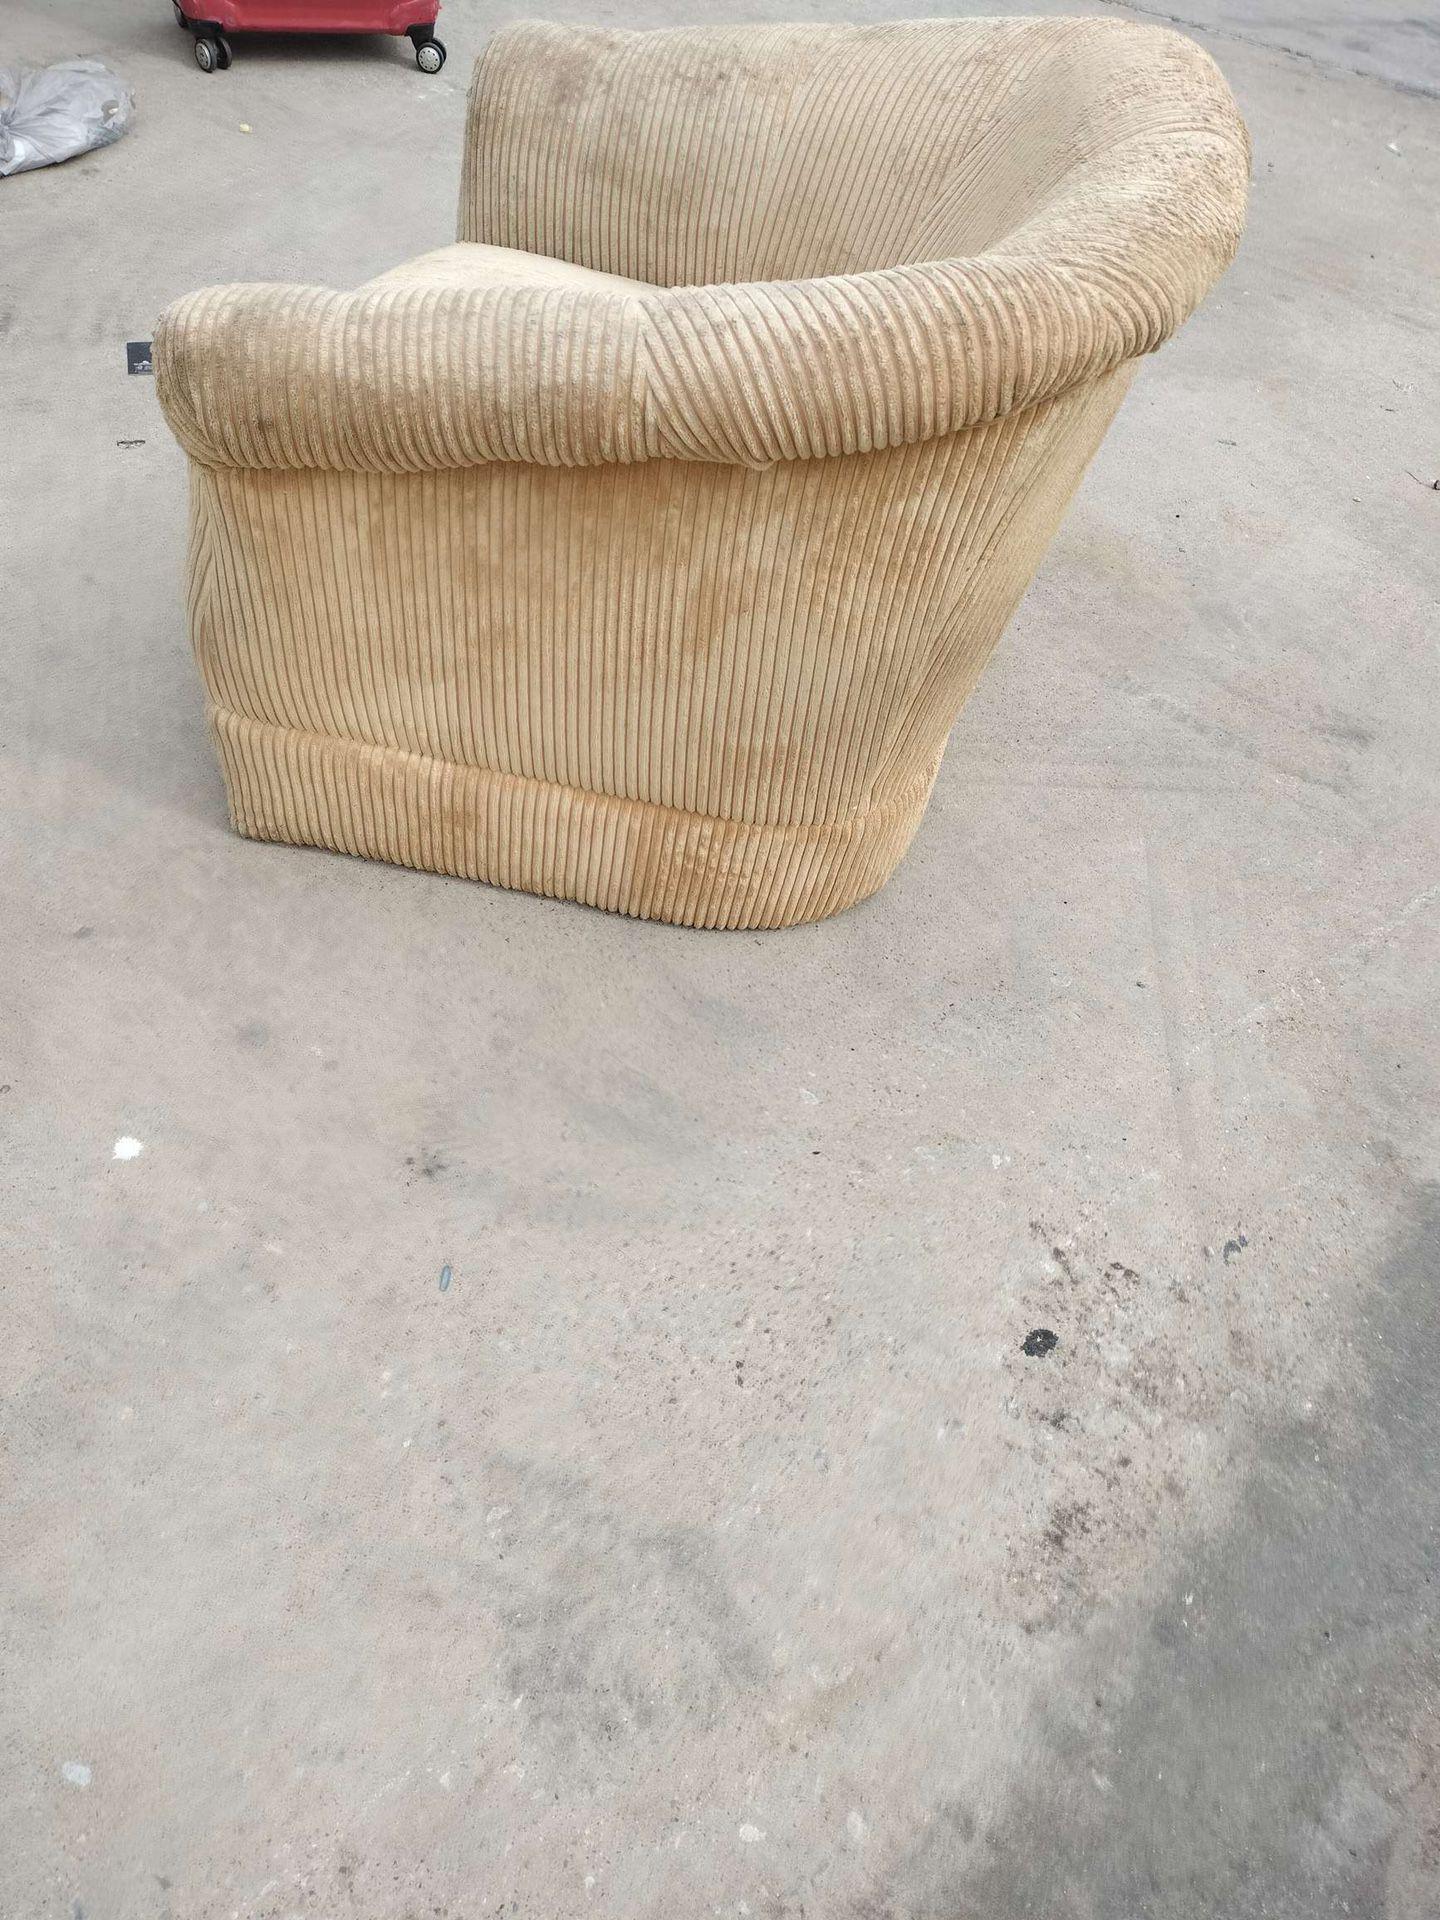 Sitting Chair That Rocks And Spins 